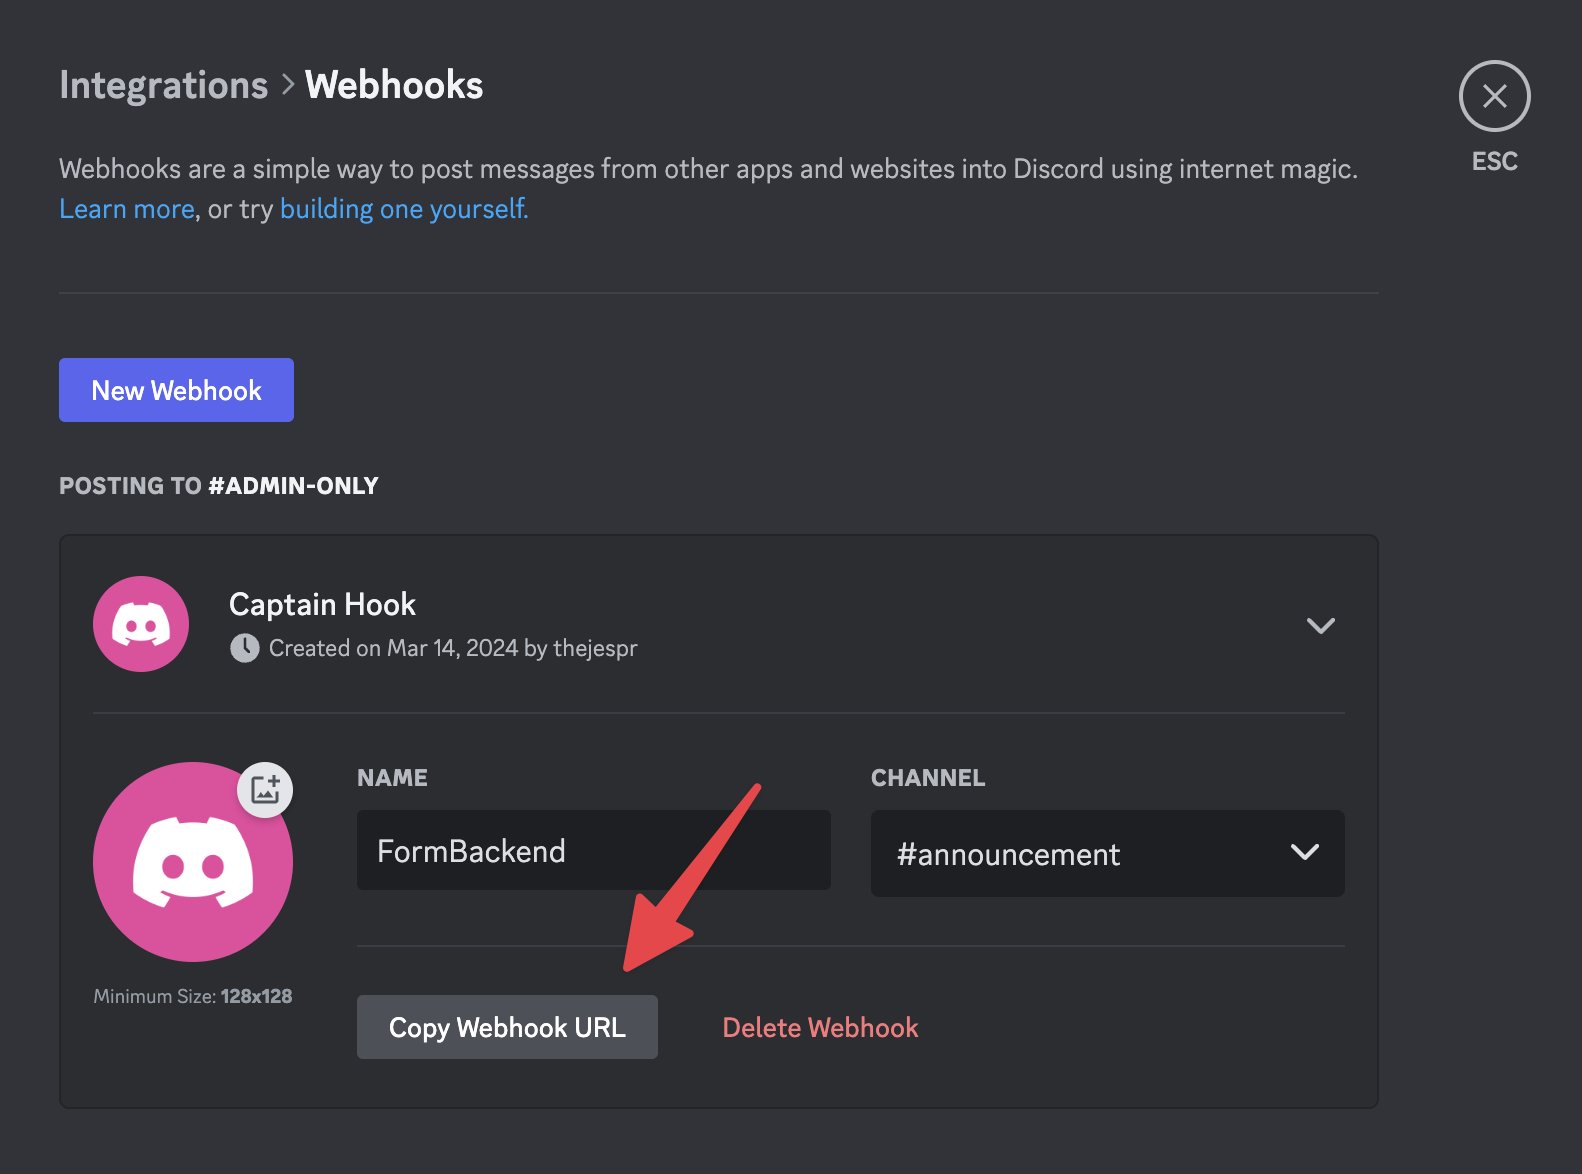 Copy the webhook url that points at Discord